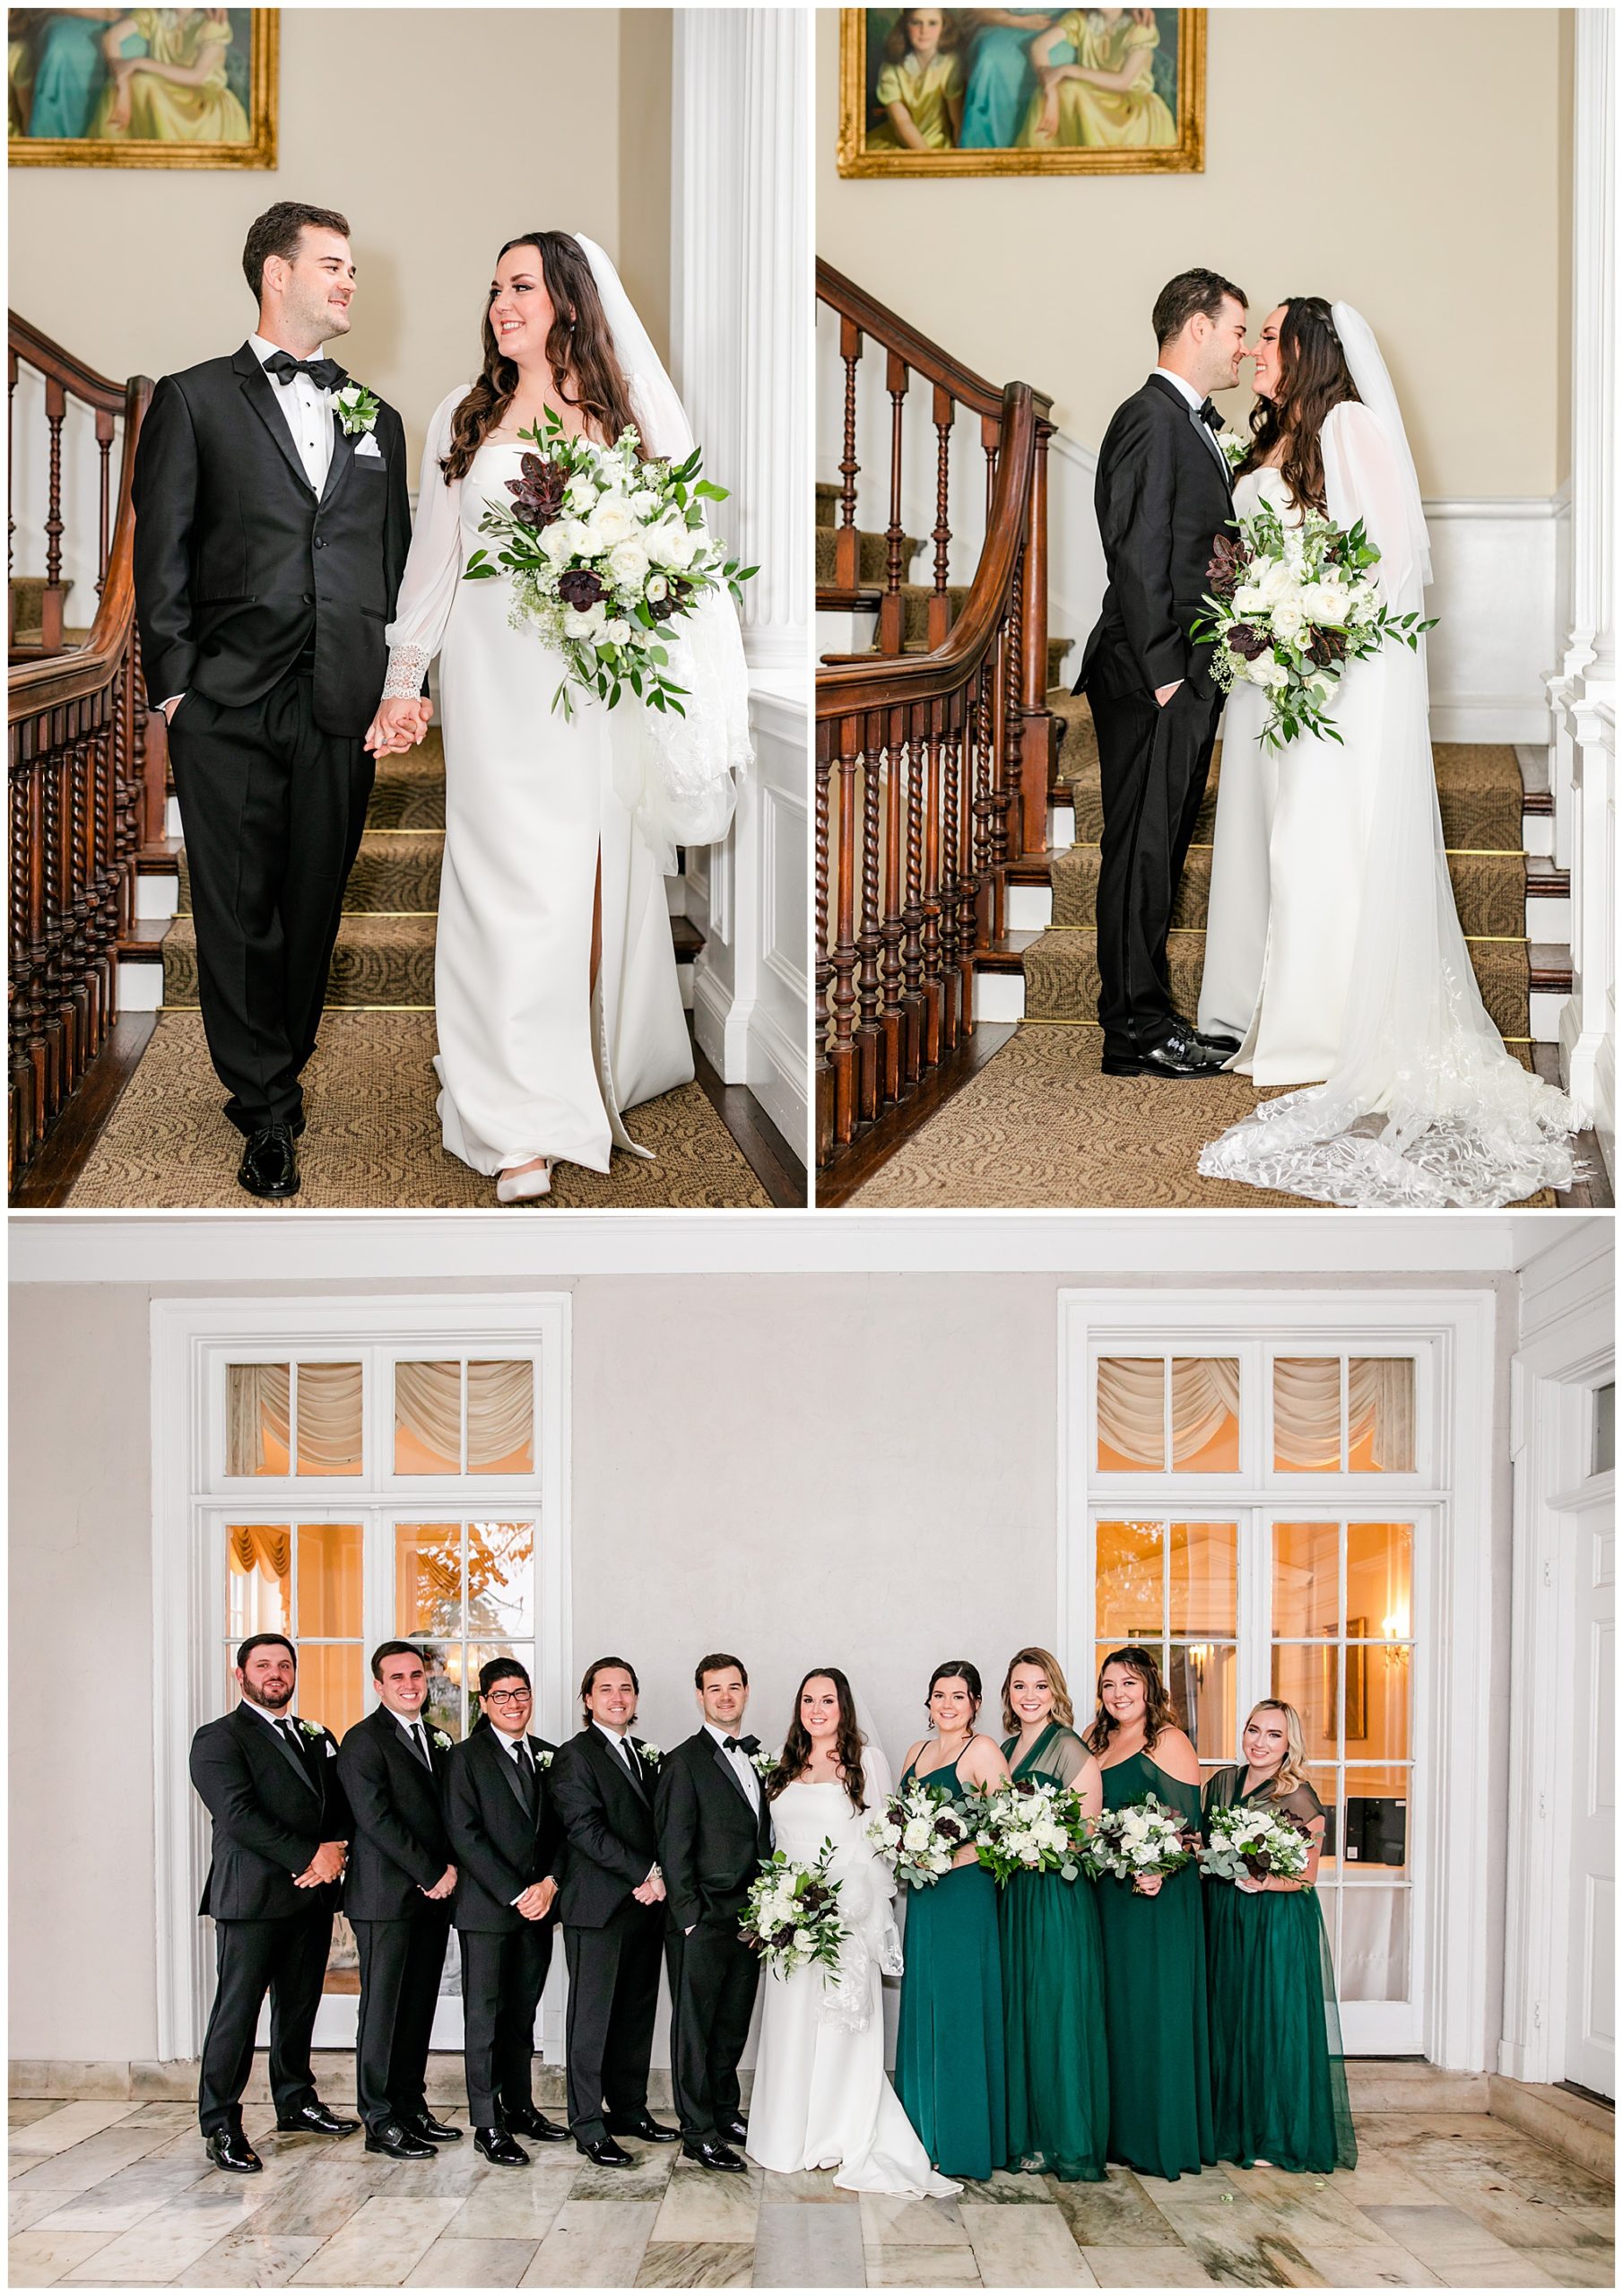 emerald and ivory Woodend Sanctuary wedding, autumn Woodend Sanctuary wedding, rainy day wedding, Maryland wedding venues, Chevy Chase MD wedding venue, mansion wedding, manor house wedding, indoor wedding, DC wedding venue, DC wedding photographer, Baltimore wedding photographer, Rachel E.H. Photography, emerald and ivory aesthetic, bride and groom on stairs, bride and groom almost kissing, bride and groom with wedding party